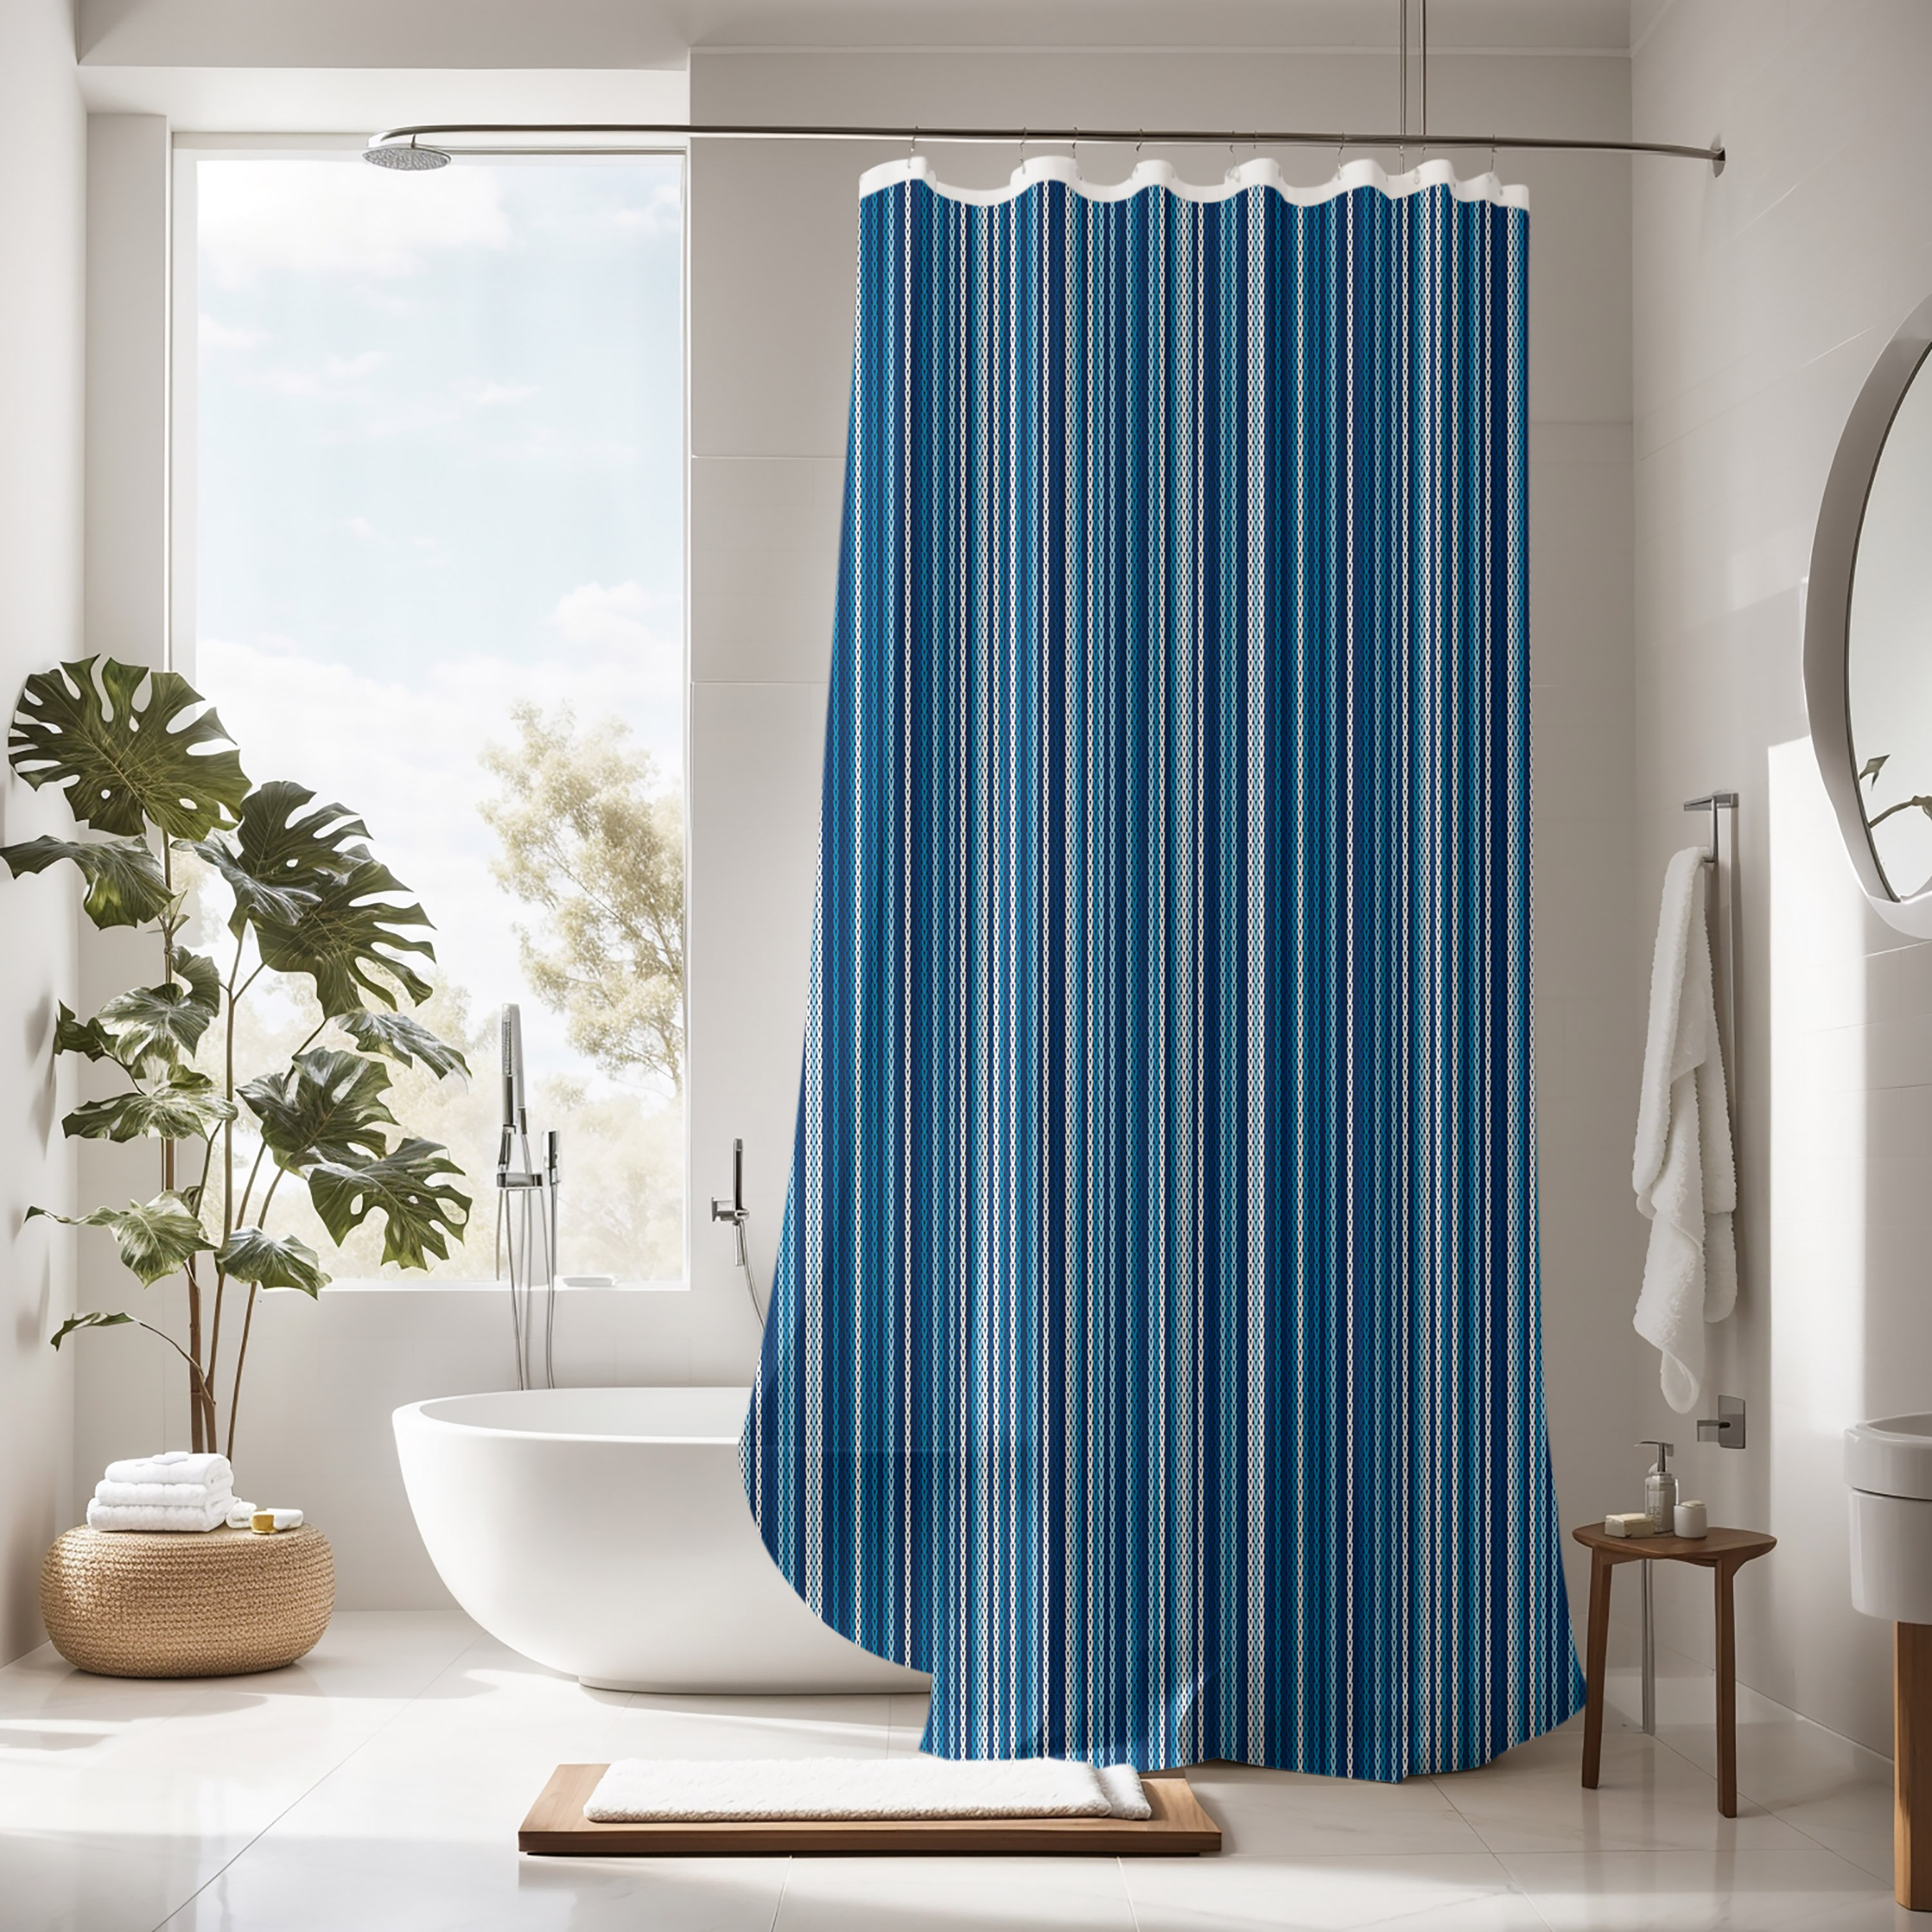 Striped Shower Curtain East Urban Home Size: 83 H x 70 W